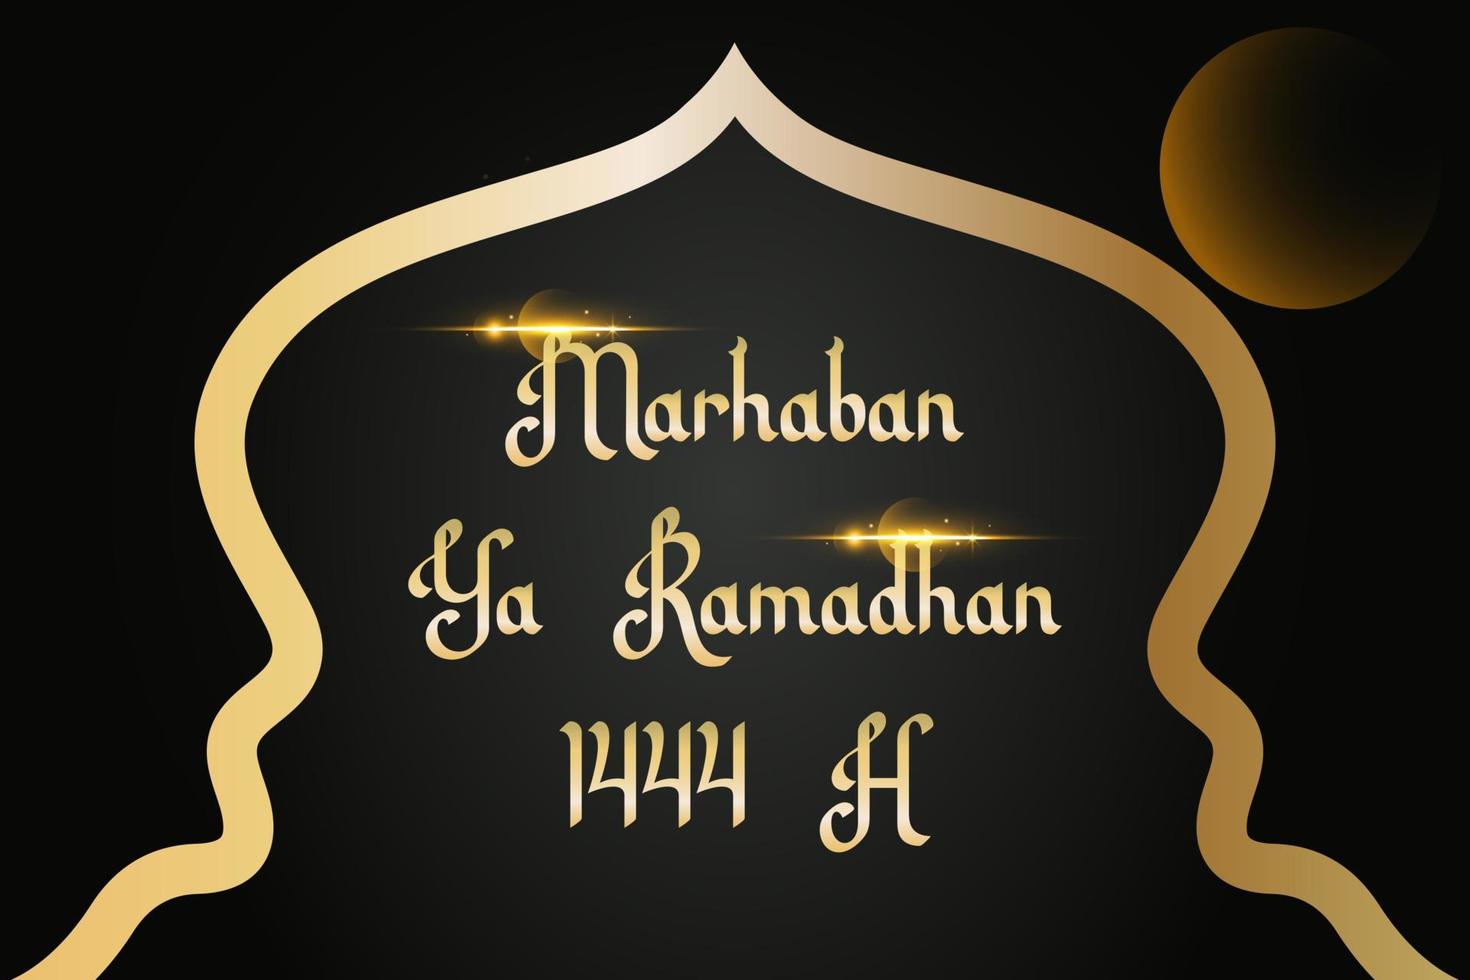 Marhaban Ya Ramadhan 1444 H Greeting with hand lettering calligraphy and illustration. . Islamic greeting background can use for Eid Mubarak vector